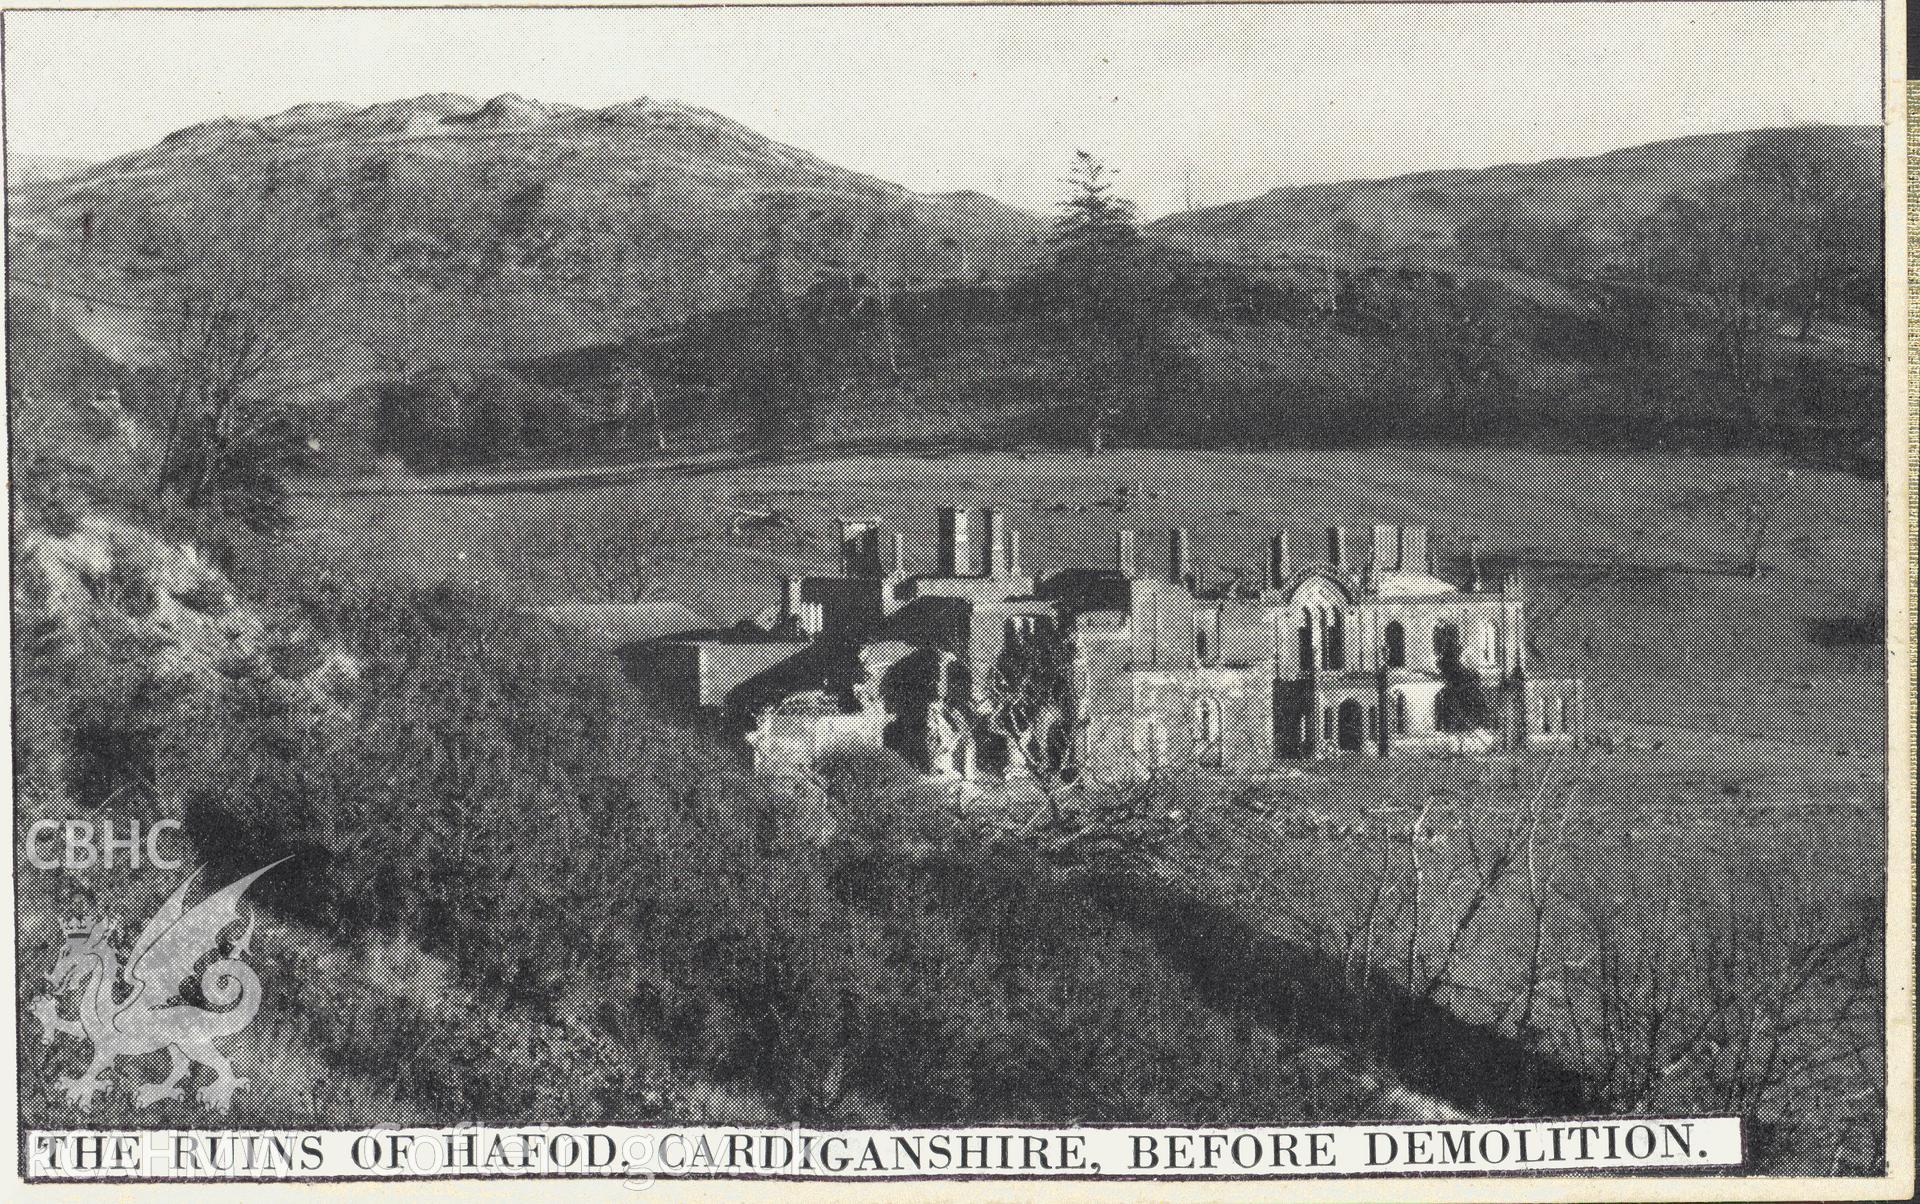 Digitised postcard image of Hafod Uchtryd mansion ruins. Produced by Parks and Gardens Data Services, from an original item in the Peter Davis Collection at Parks and Gardens UK. We hold only web-resolution images of this collection, suitable for viewing on screen and for research purposes only. We do not hold the original images, or publication quality scans.